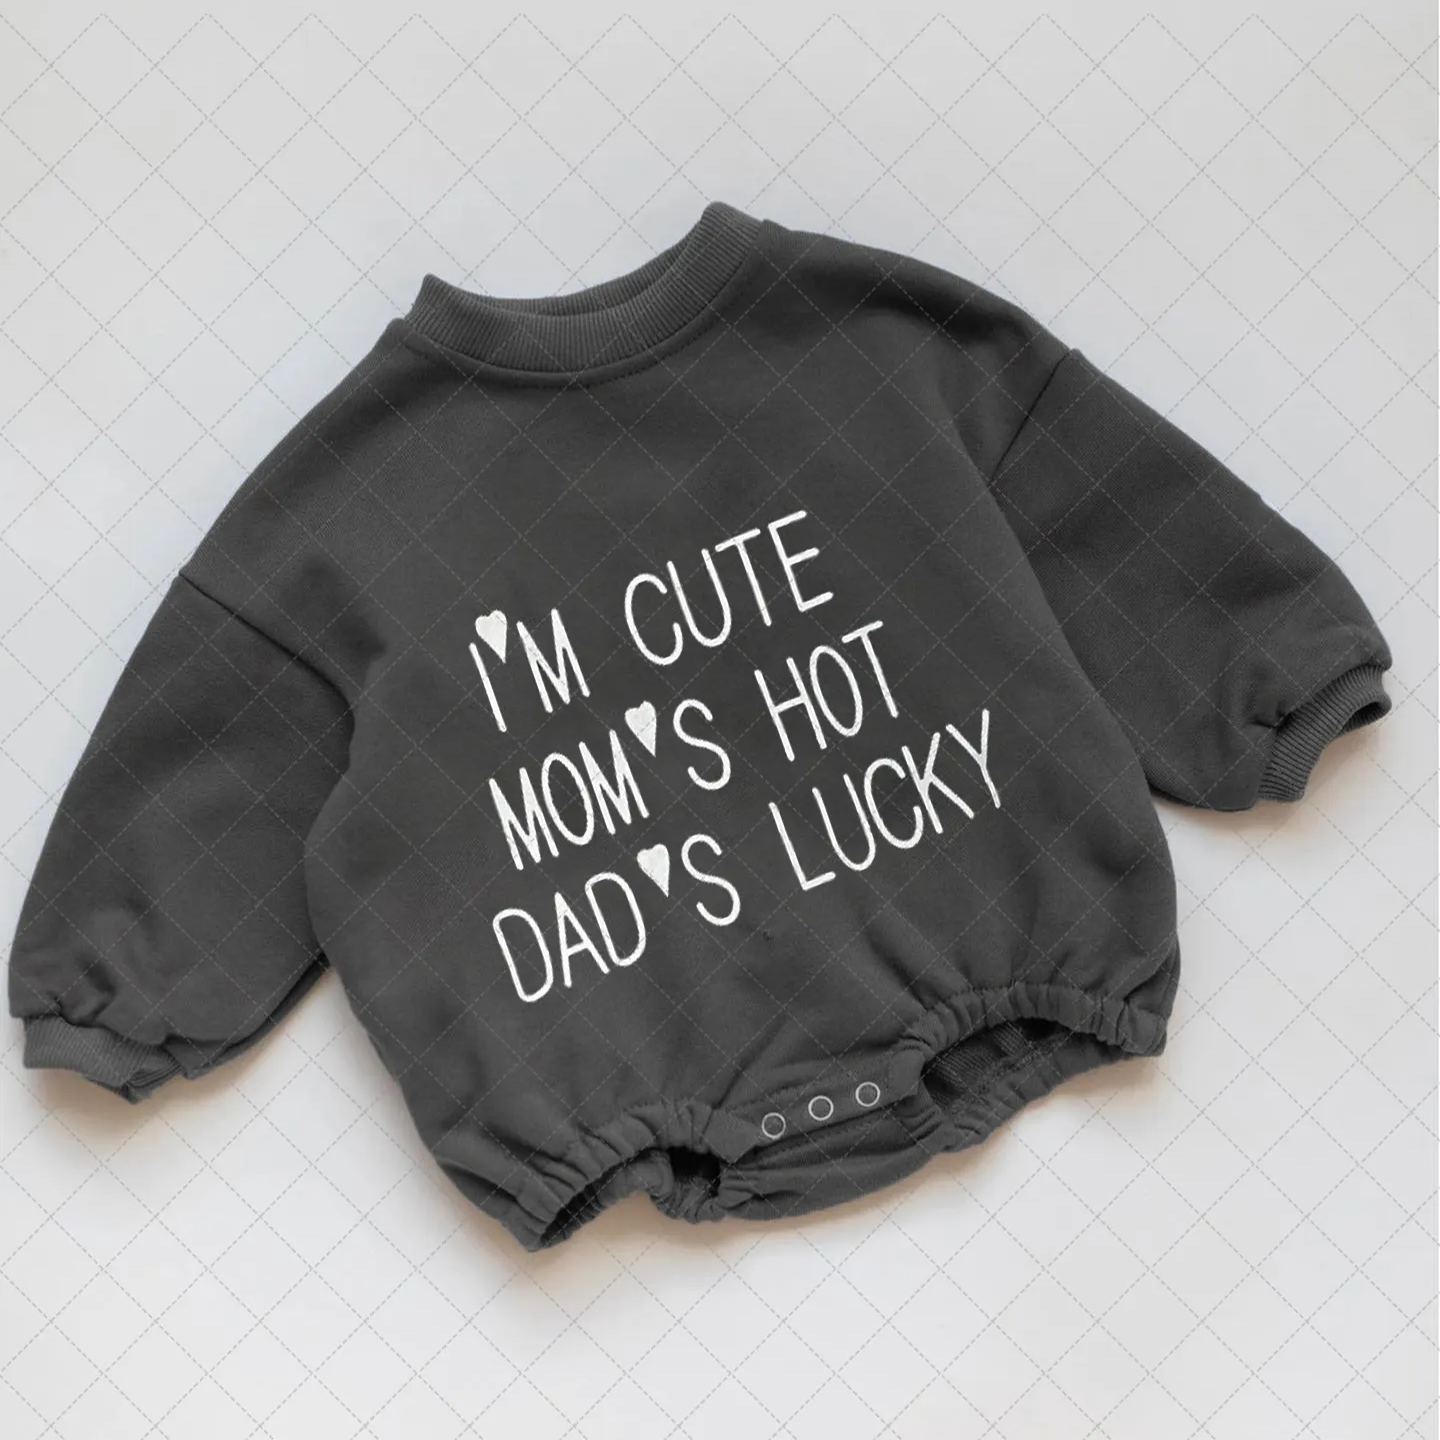 Baby I'm Cute Moms Hot Dads Lucky Romper